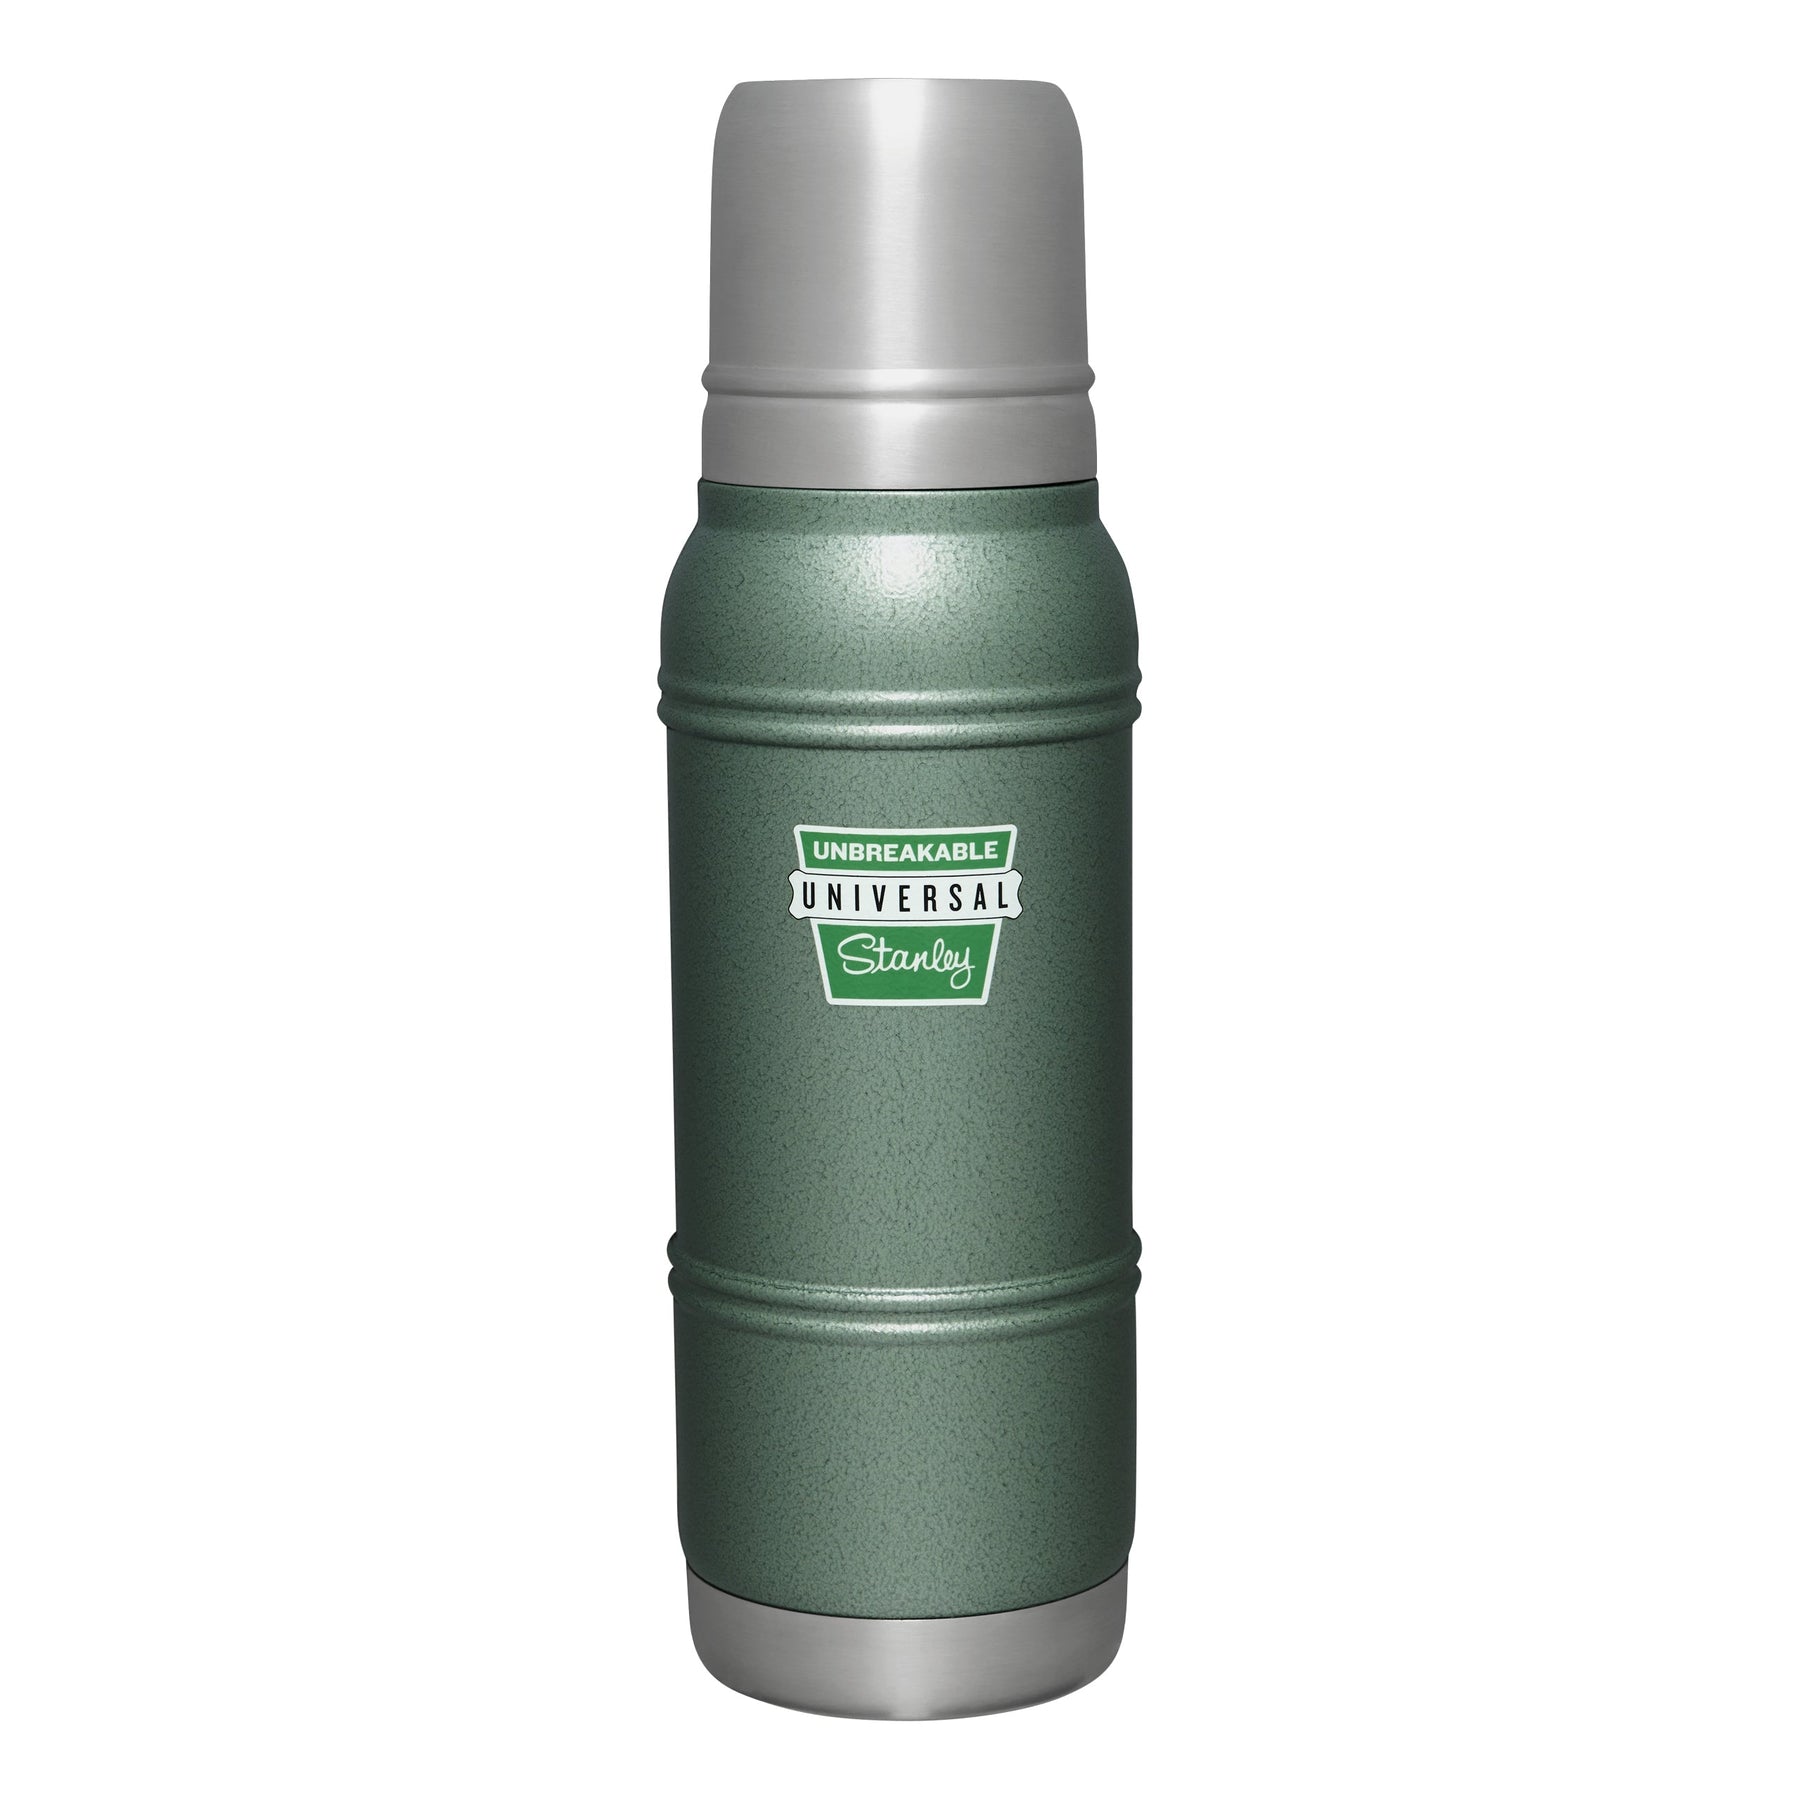 4 Year Old Stanley Thermos, Life Time Warranty Replacement